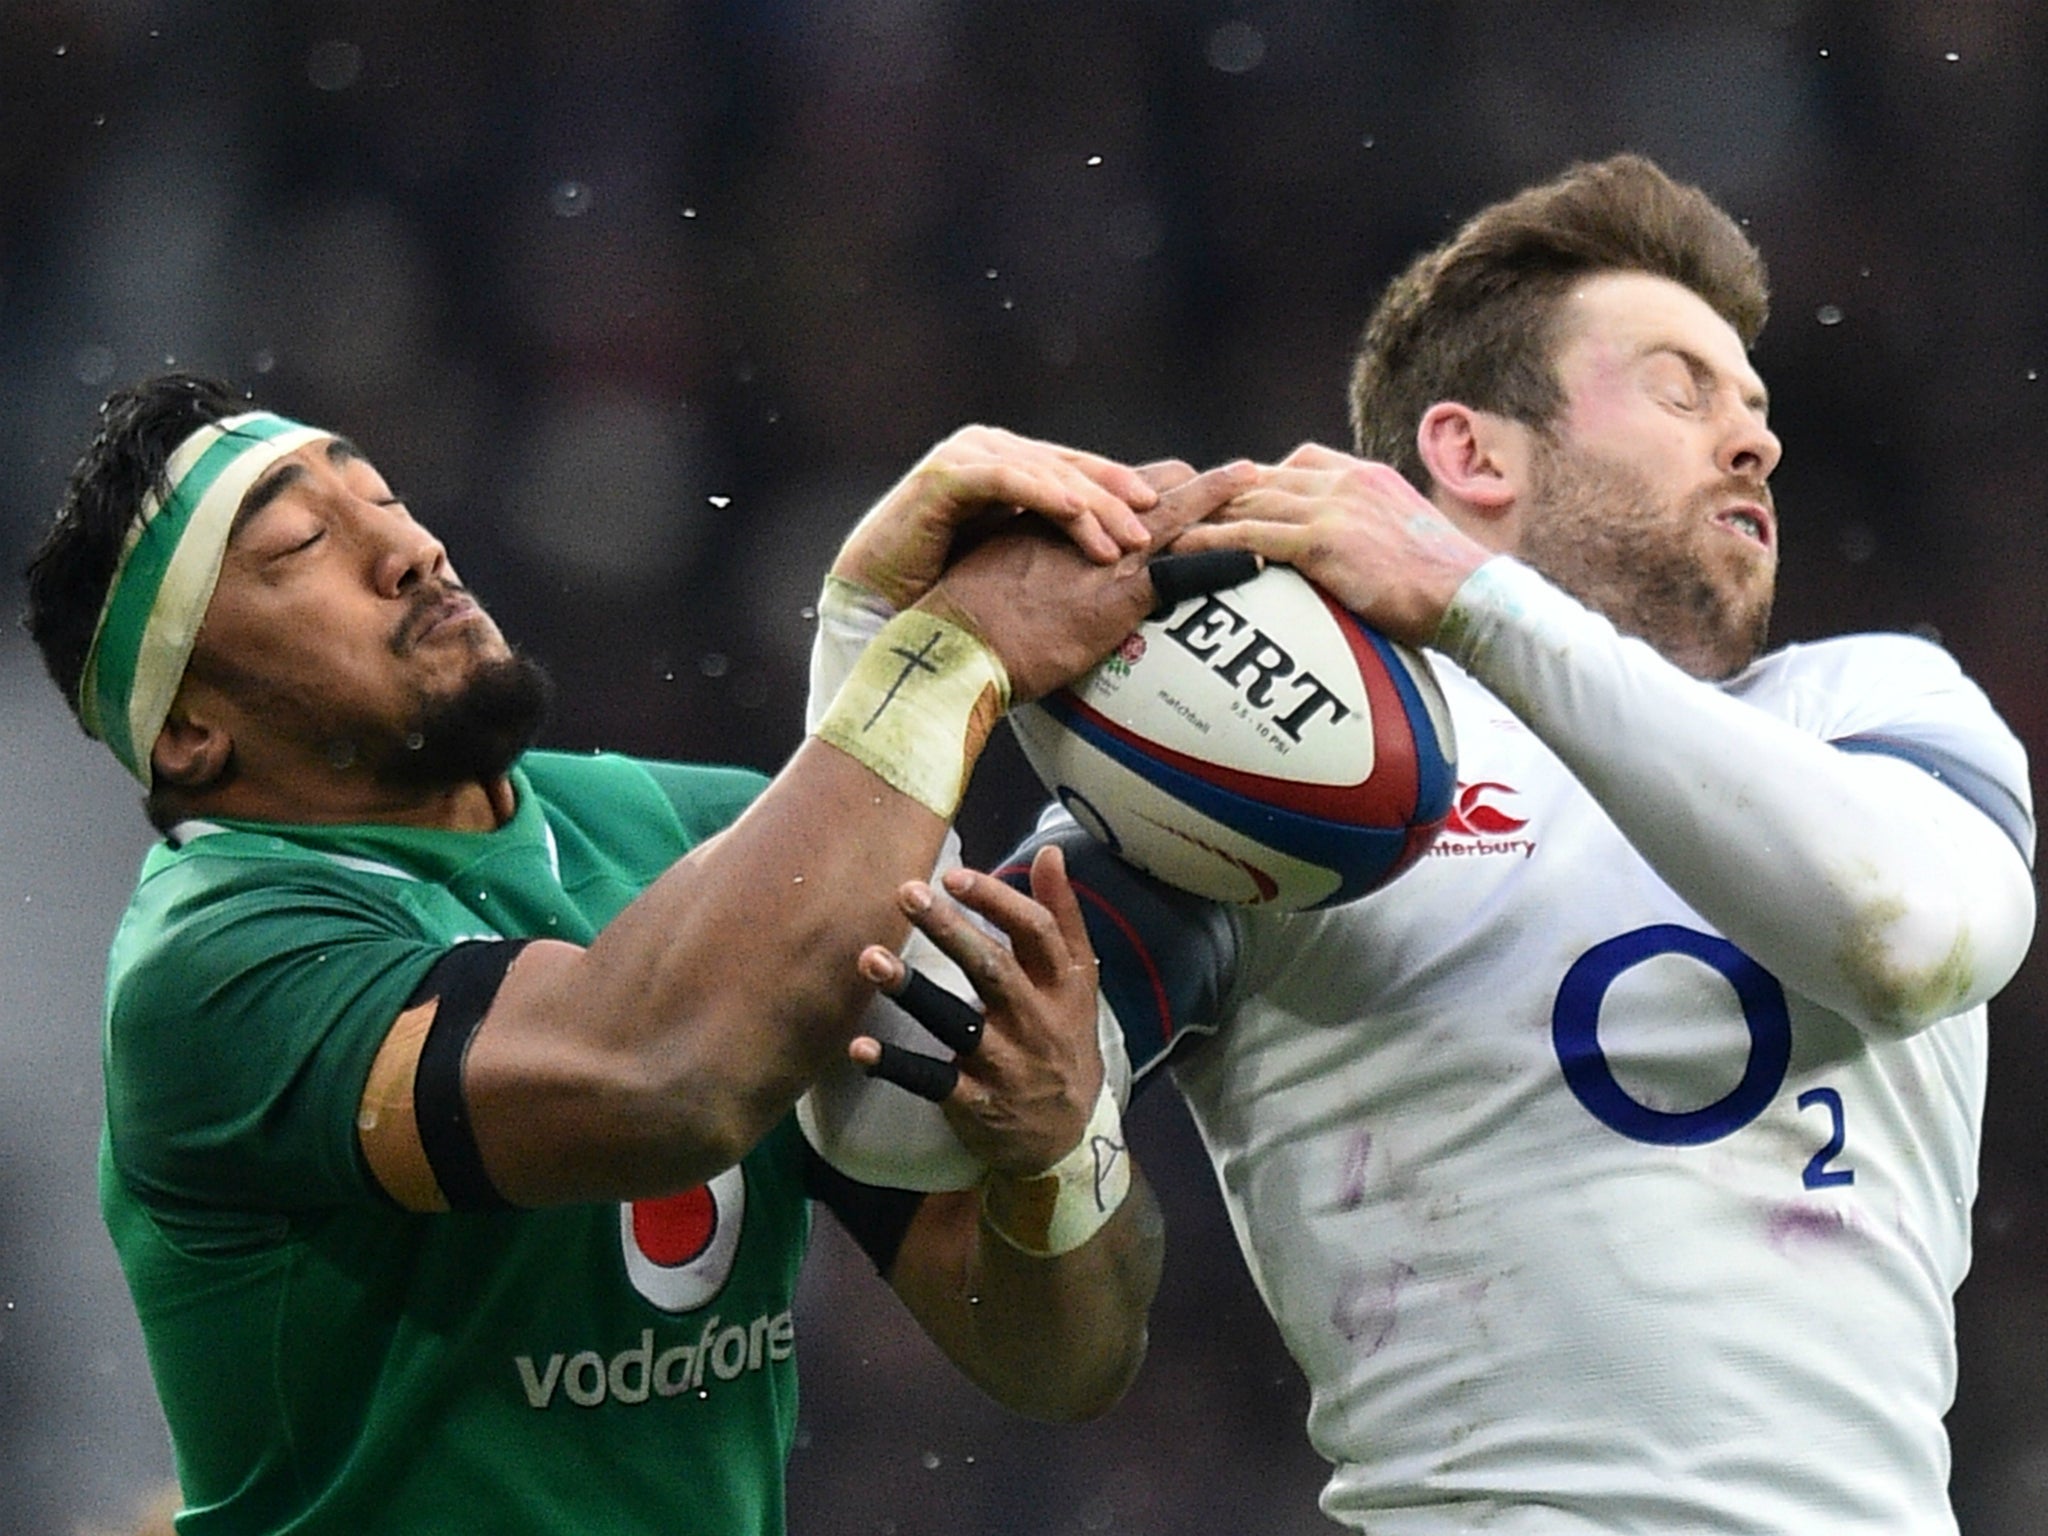 Danny Care questioned why Bundee Aki was not shown a yellow card for his dangerous tackle on Elliot Daly